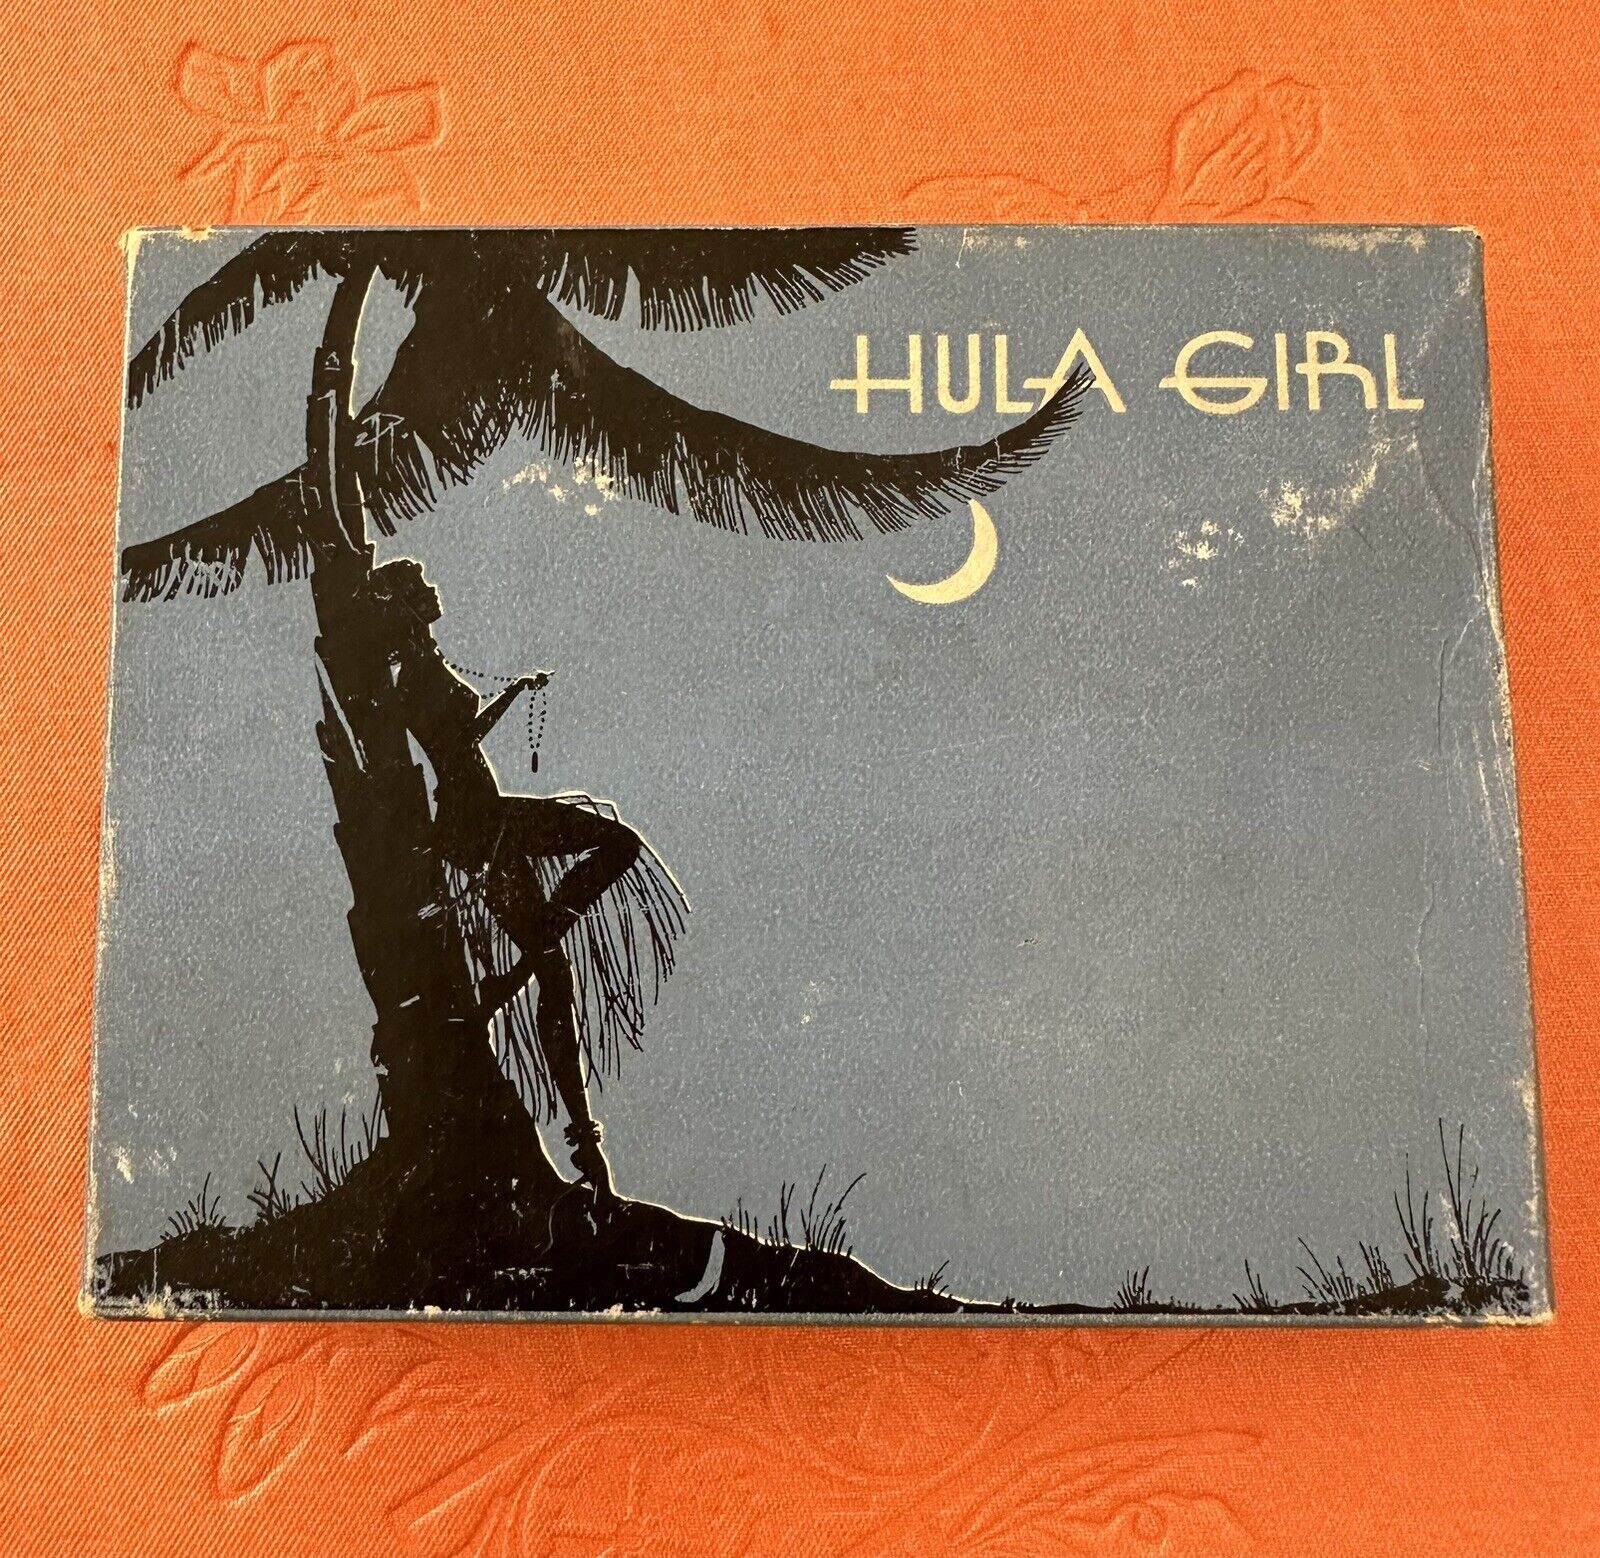 Vintage 1930s Hula Girl pin-up crescent moon unopened playing poker cards